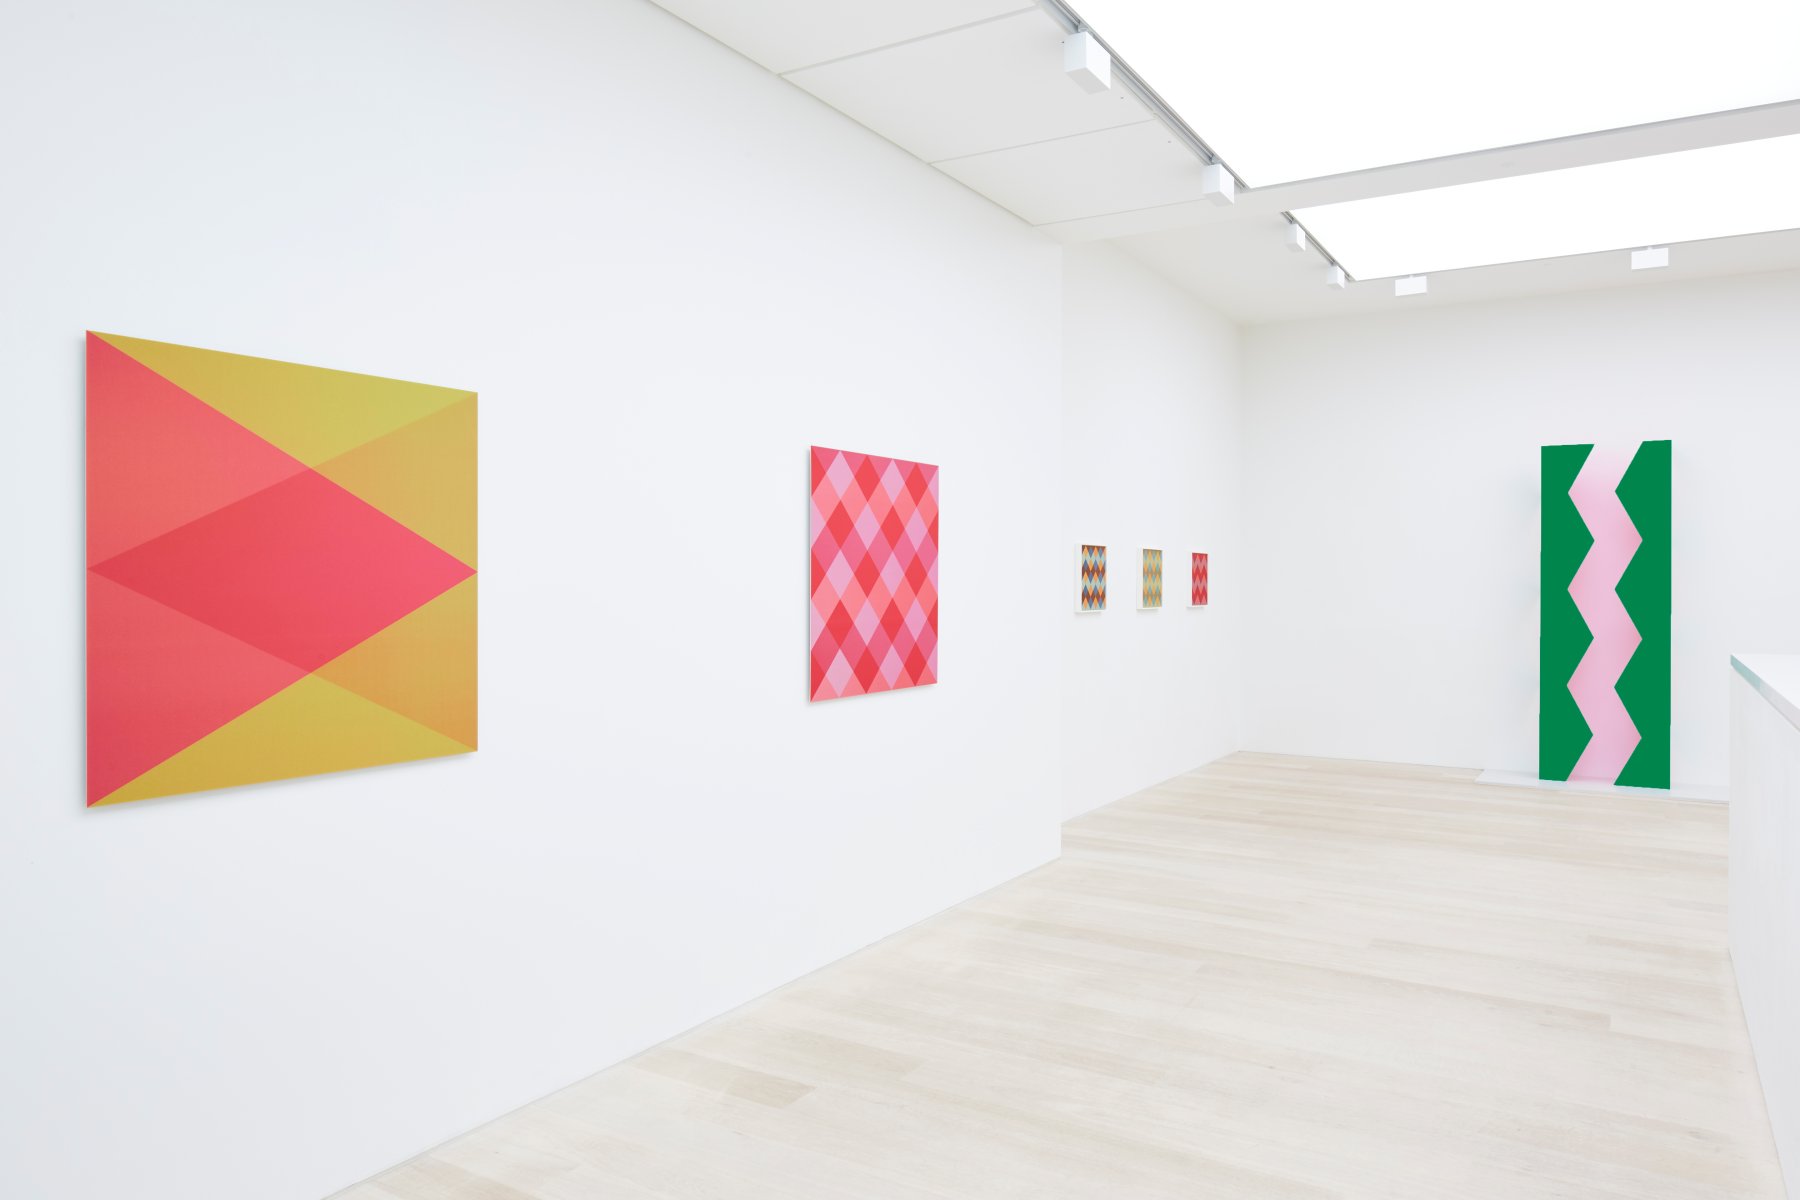 Installation image for Rana Begum: Reflection on Colour and Form, at Cristea Roberts Gallery